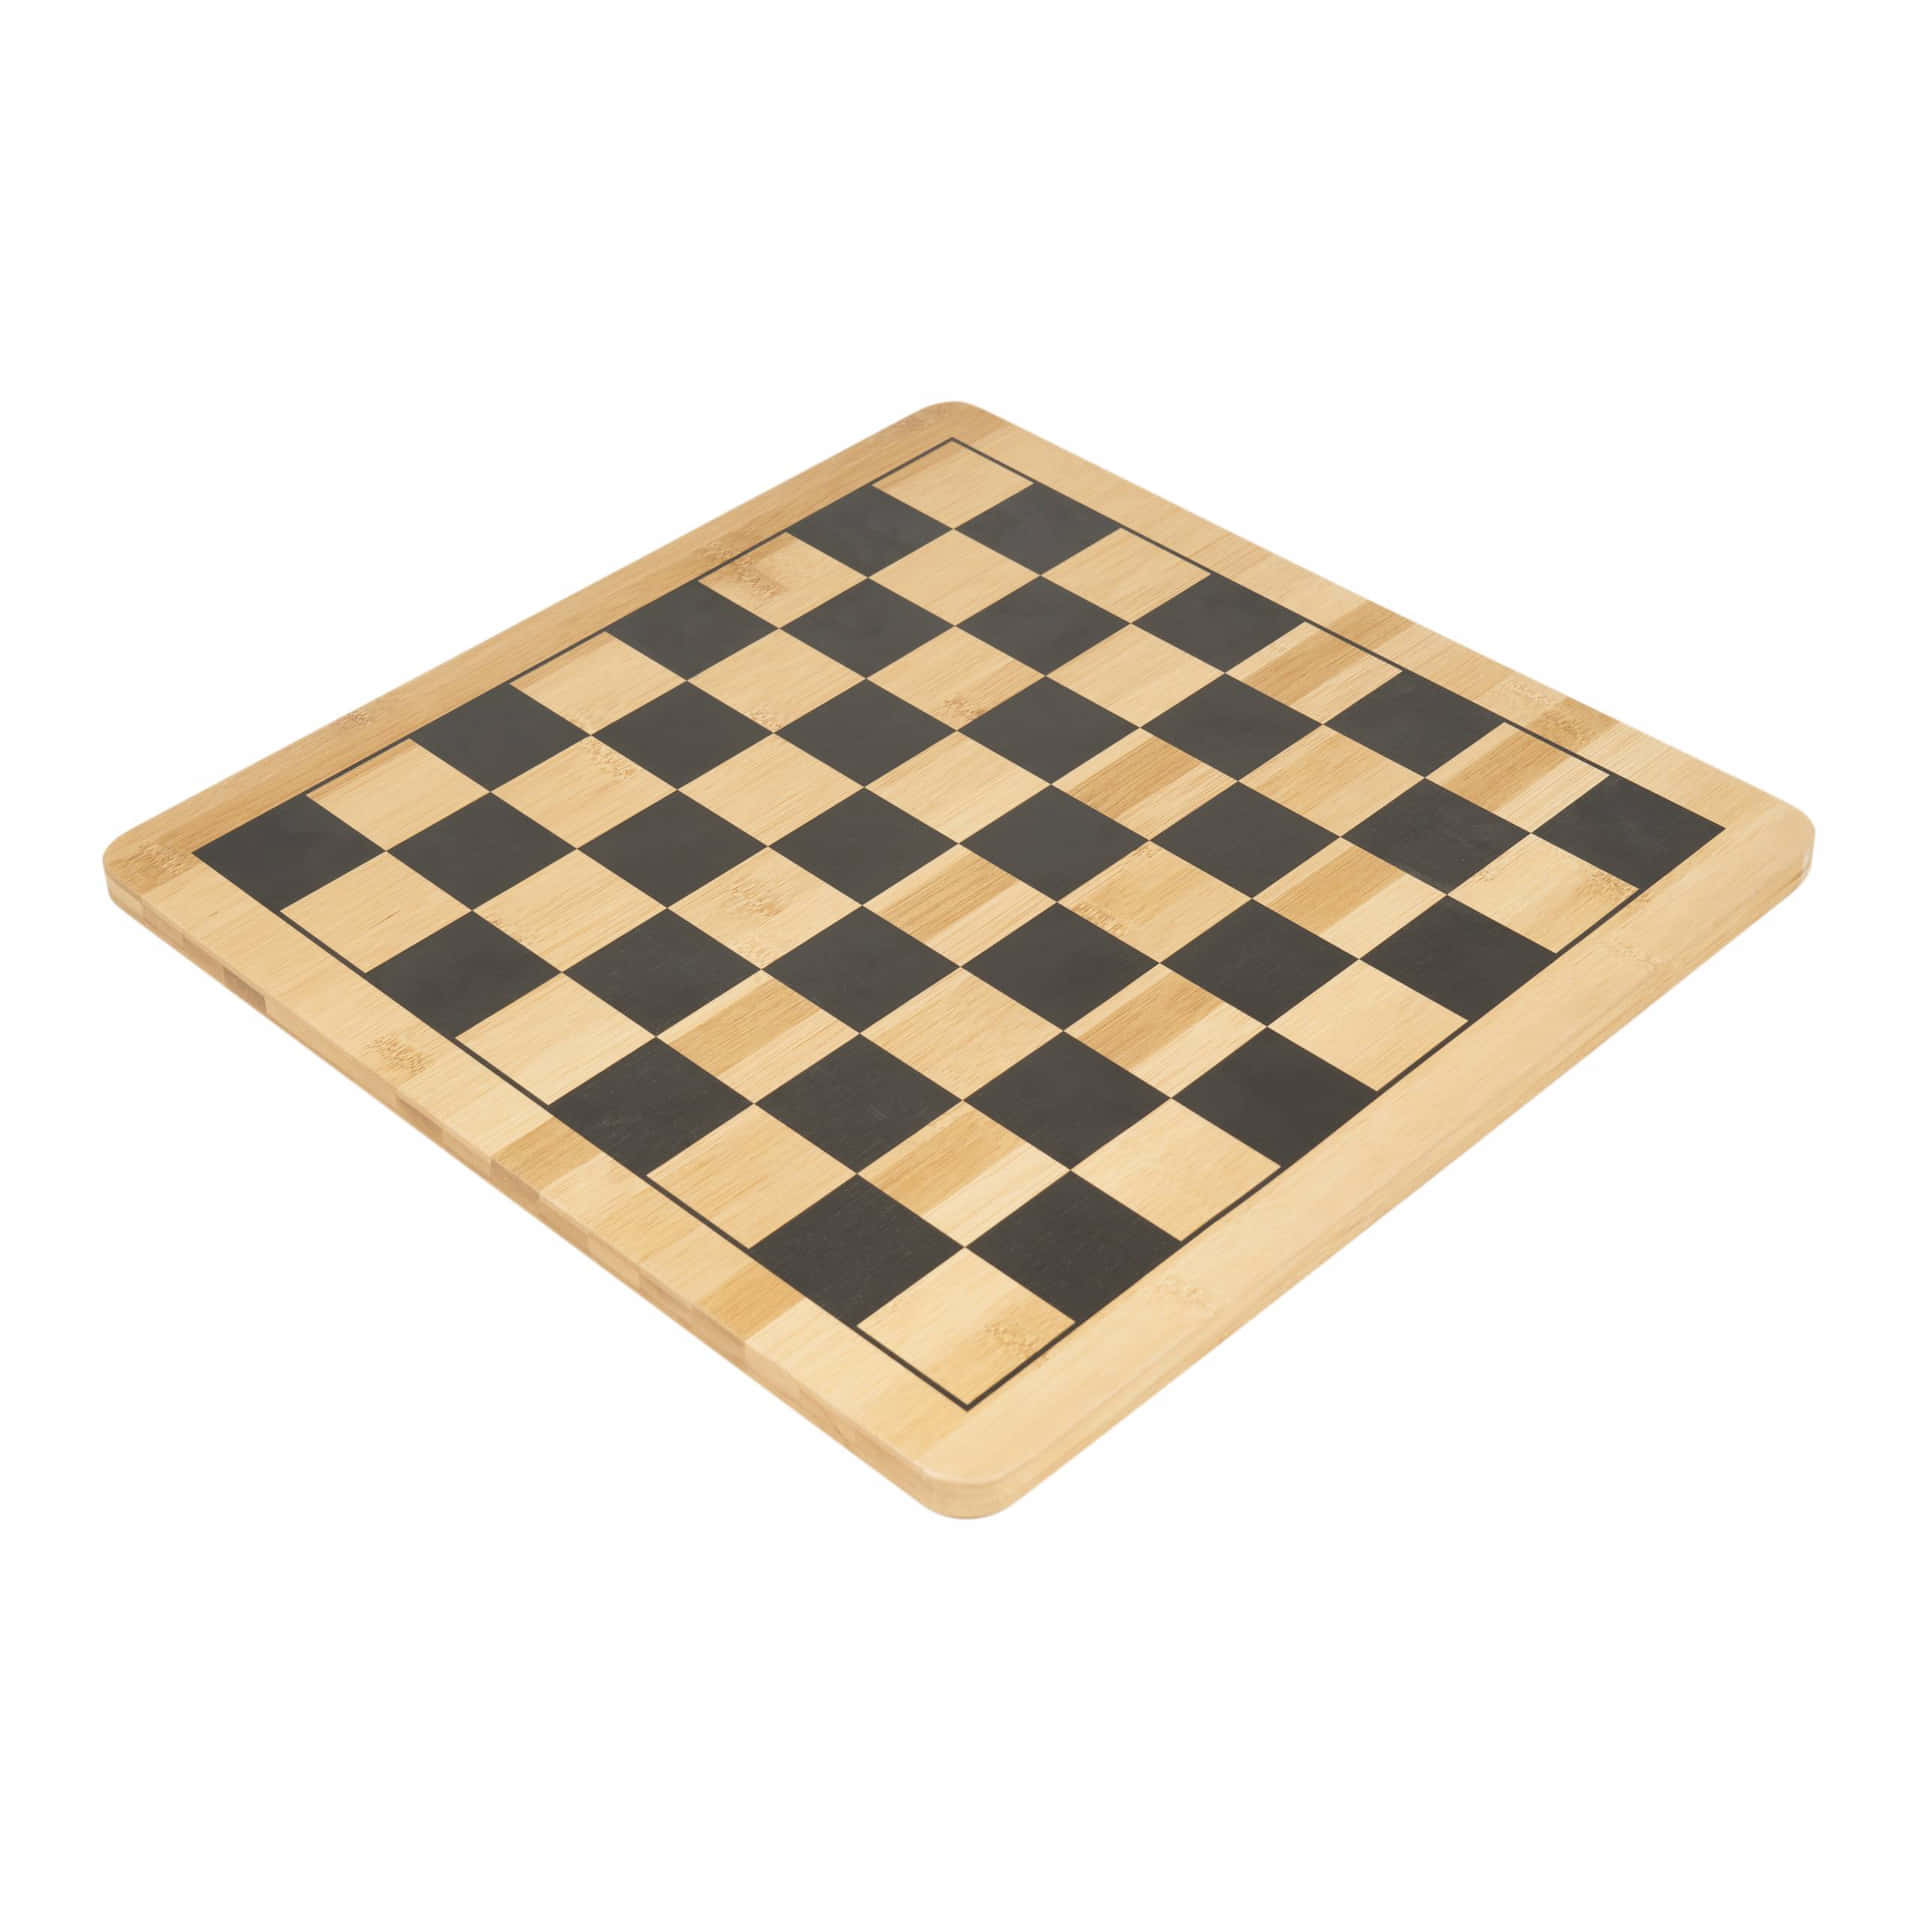 A Classic Game Of Strategy - A Chessboard.